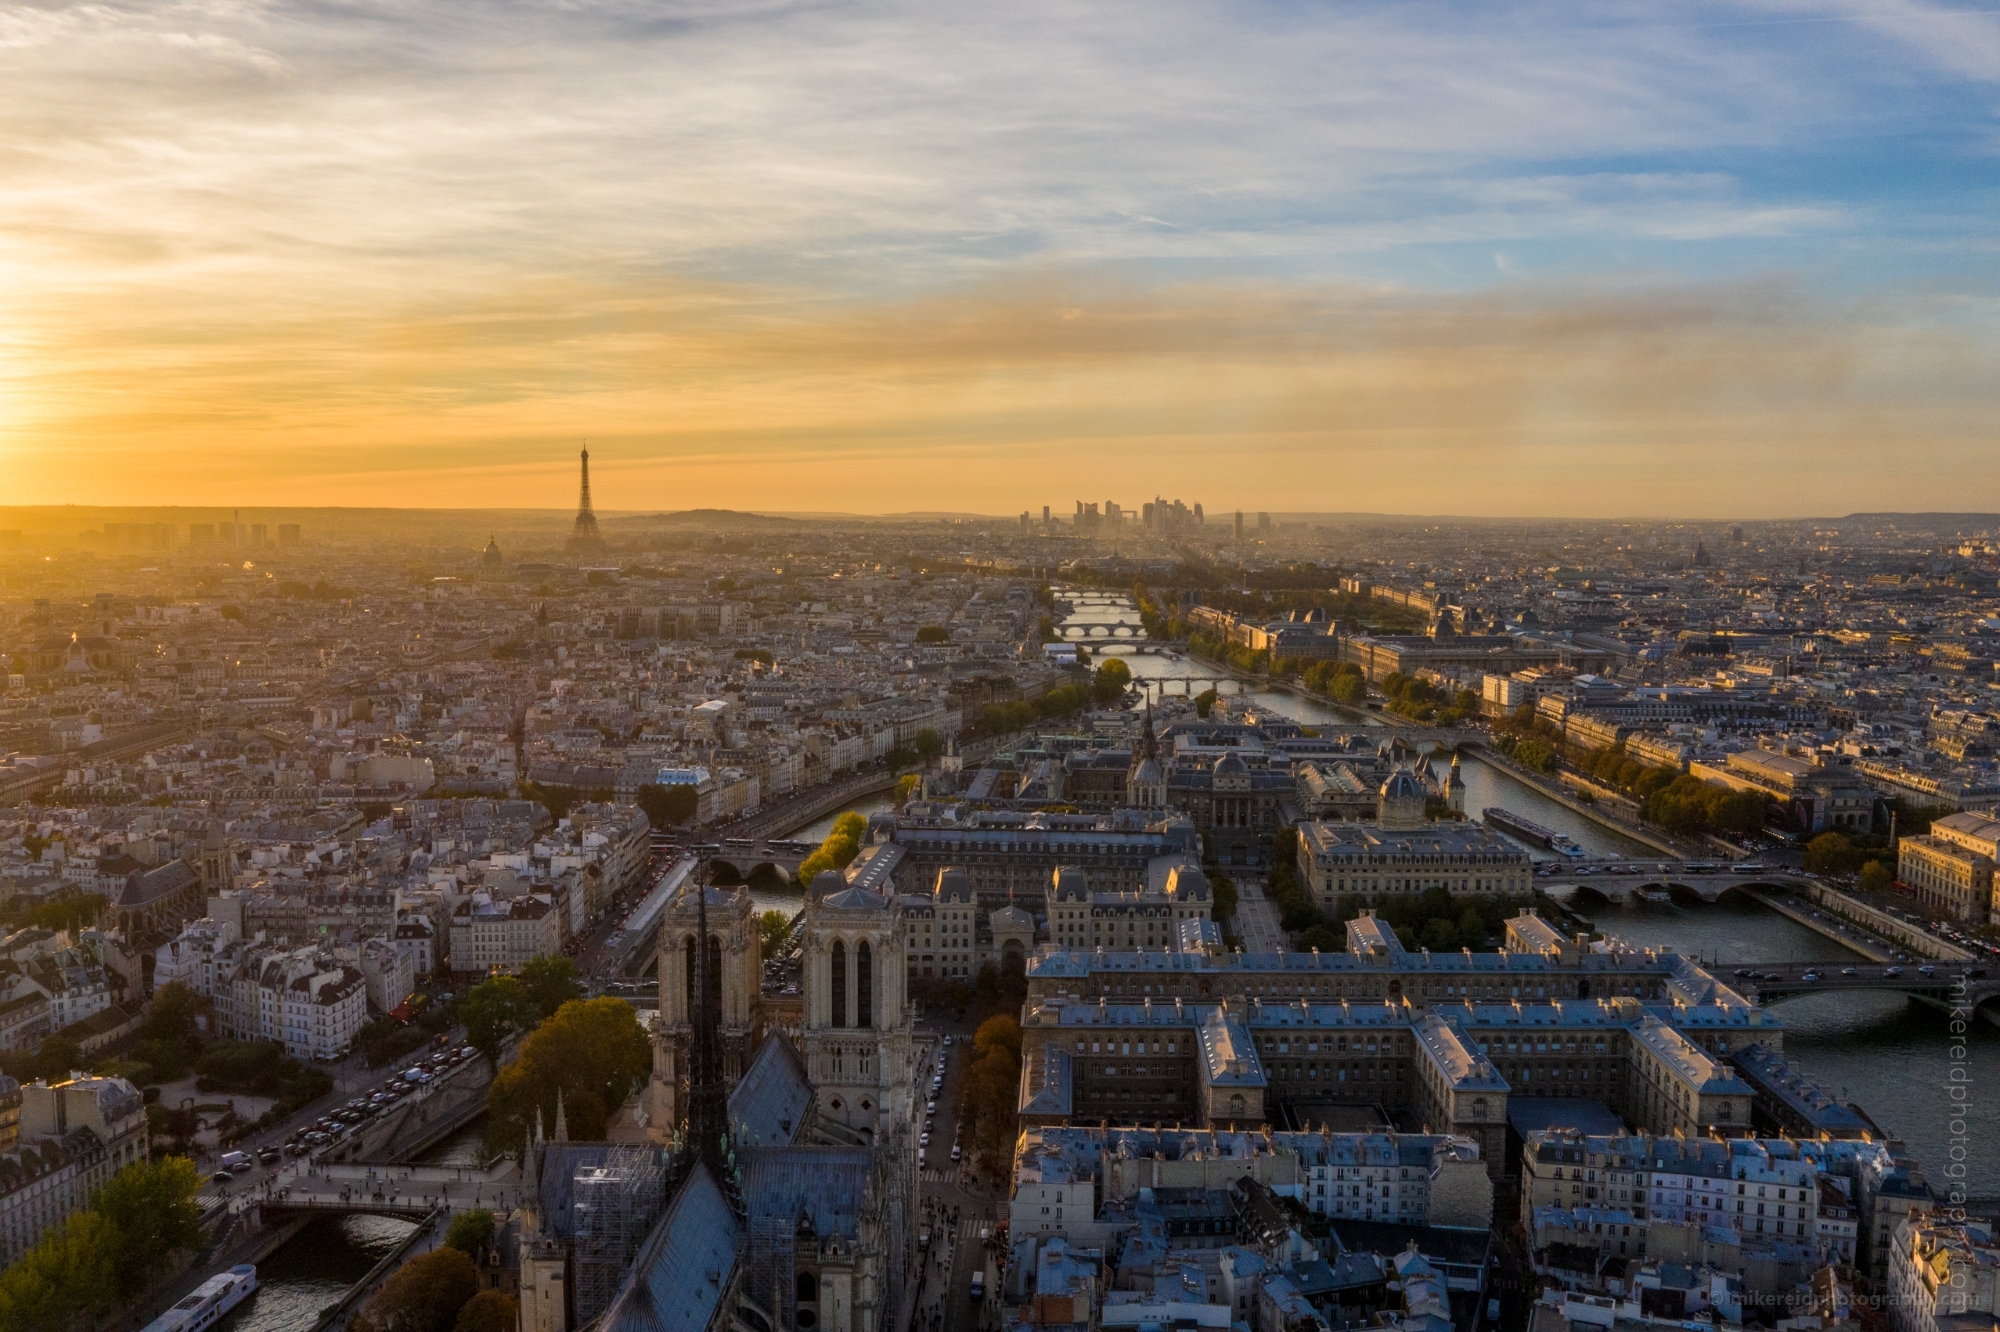 Over Paris Notre Dame and the Eiffel Tower at Sunset DJI Mavic Pro 2